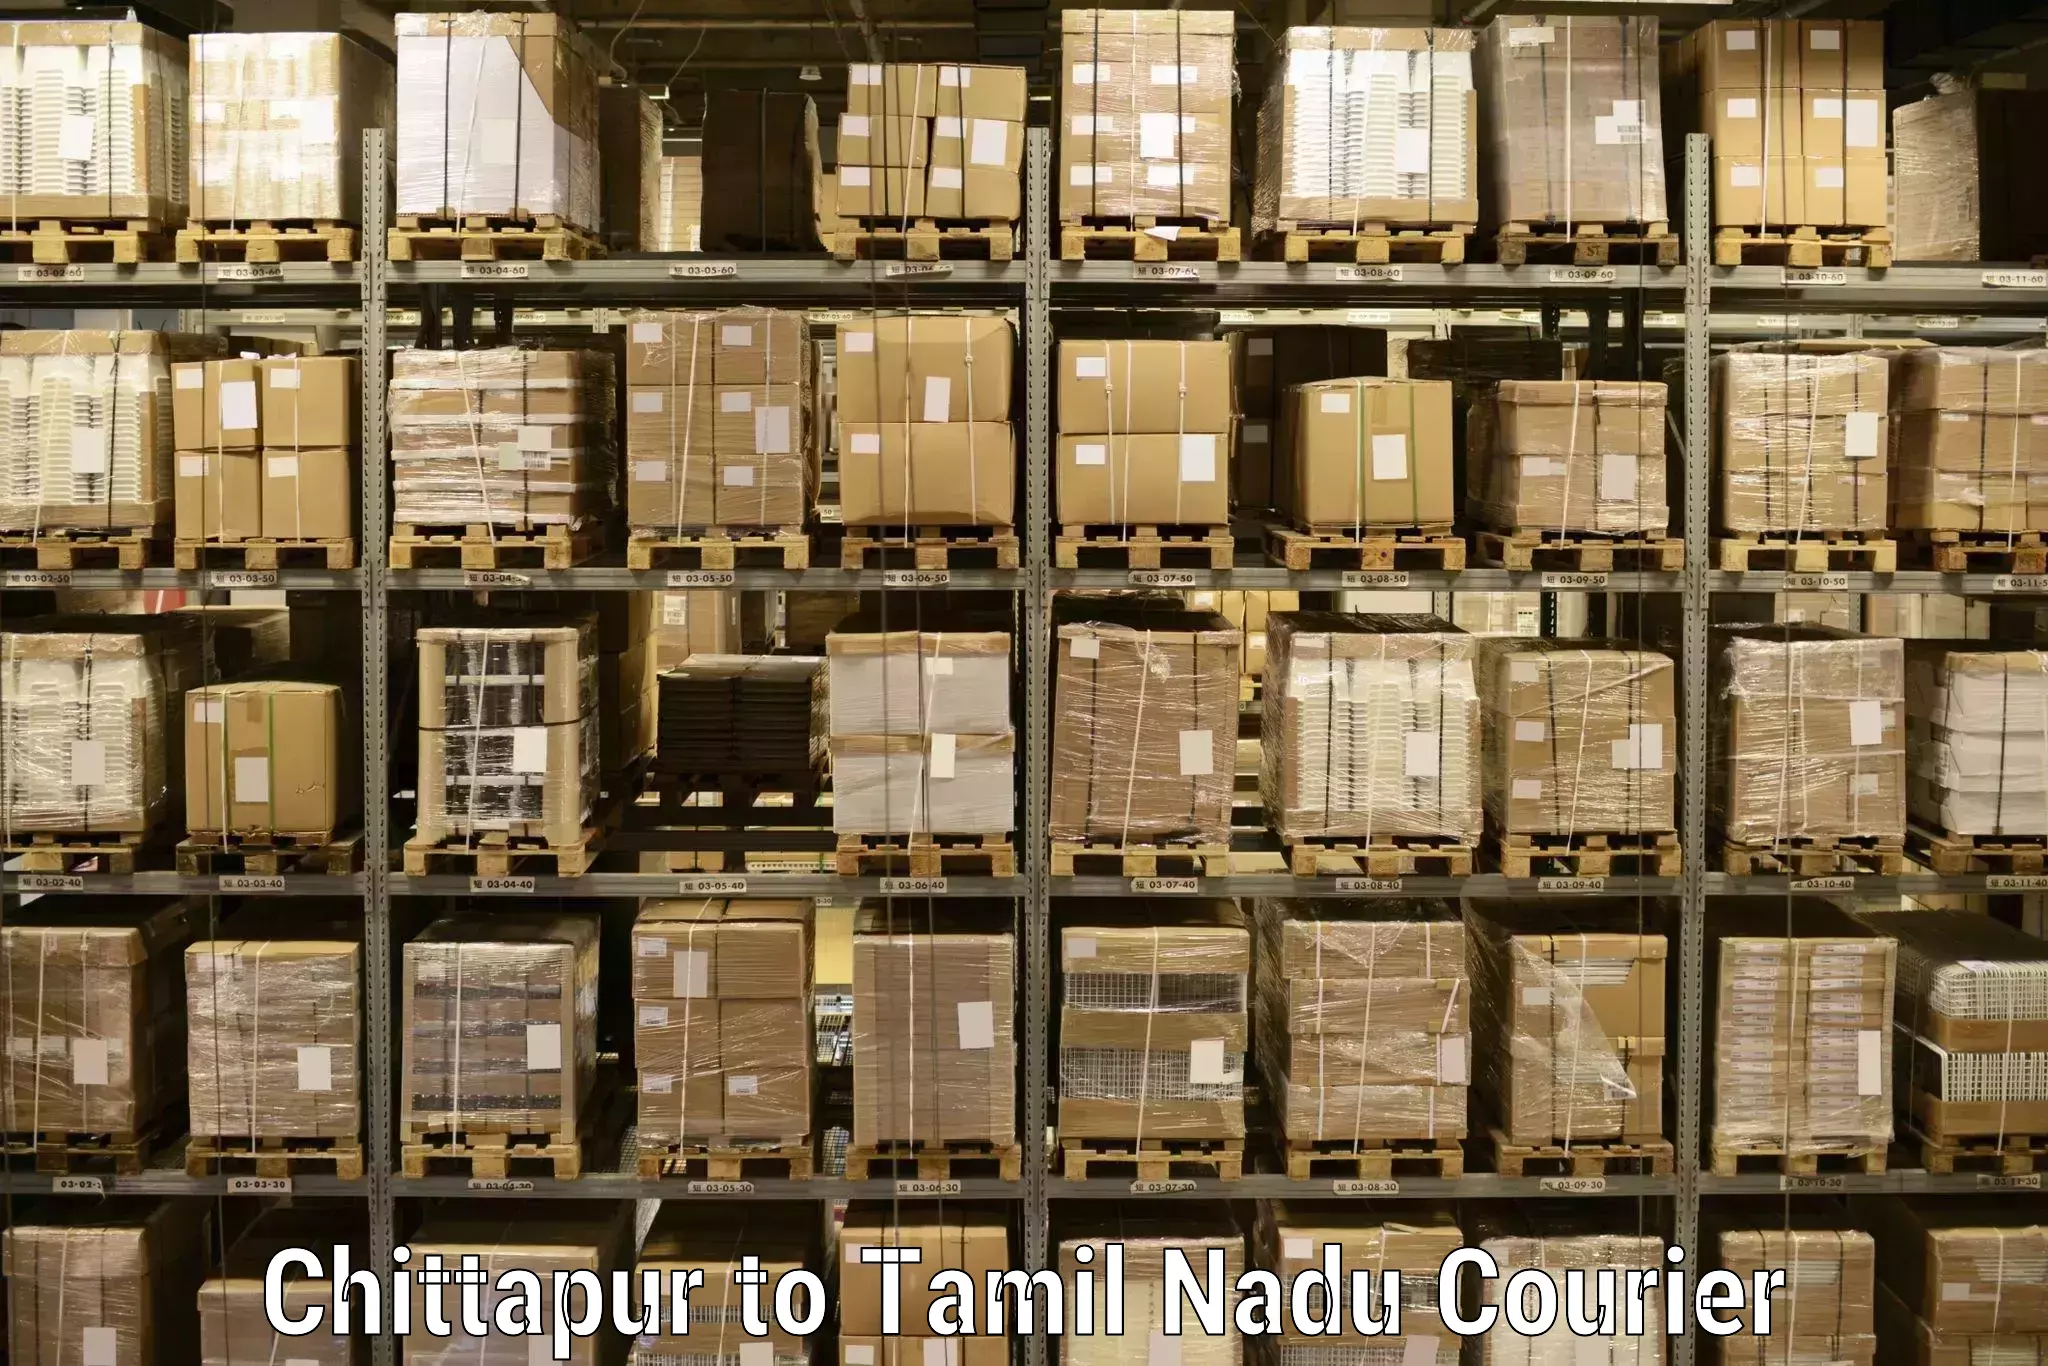 Easy access courier services Chittapur to Theni